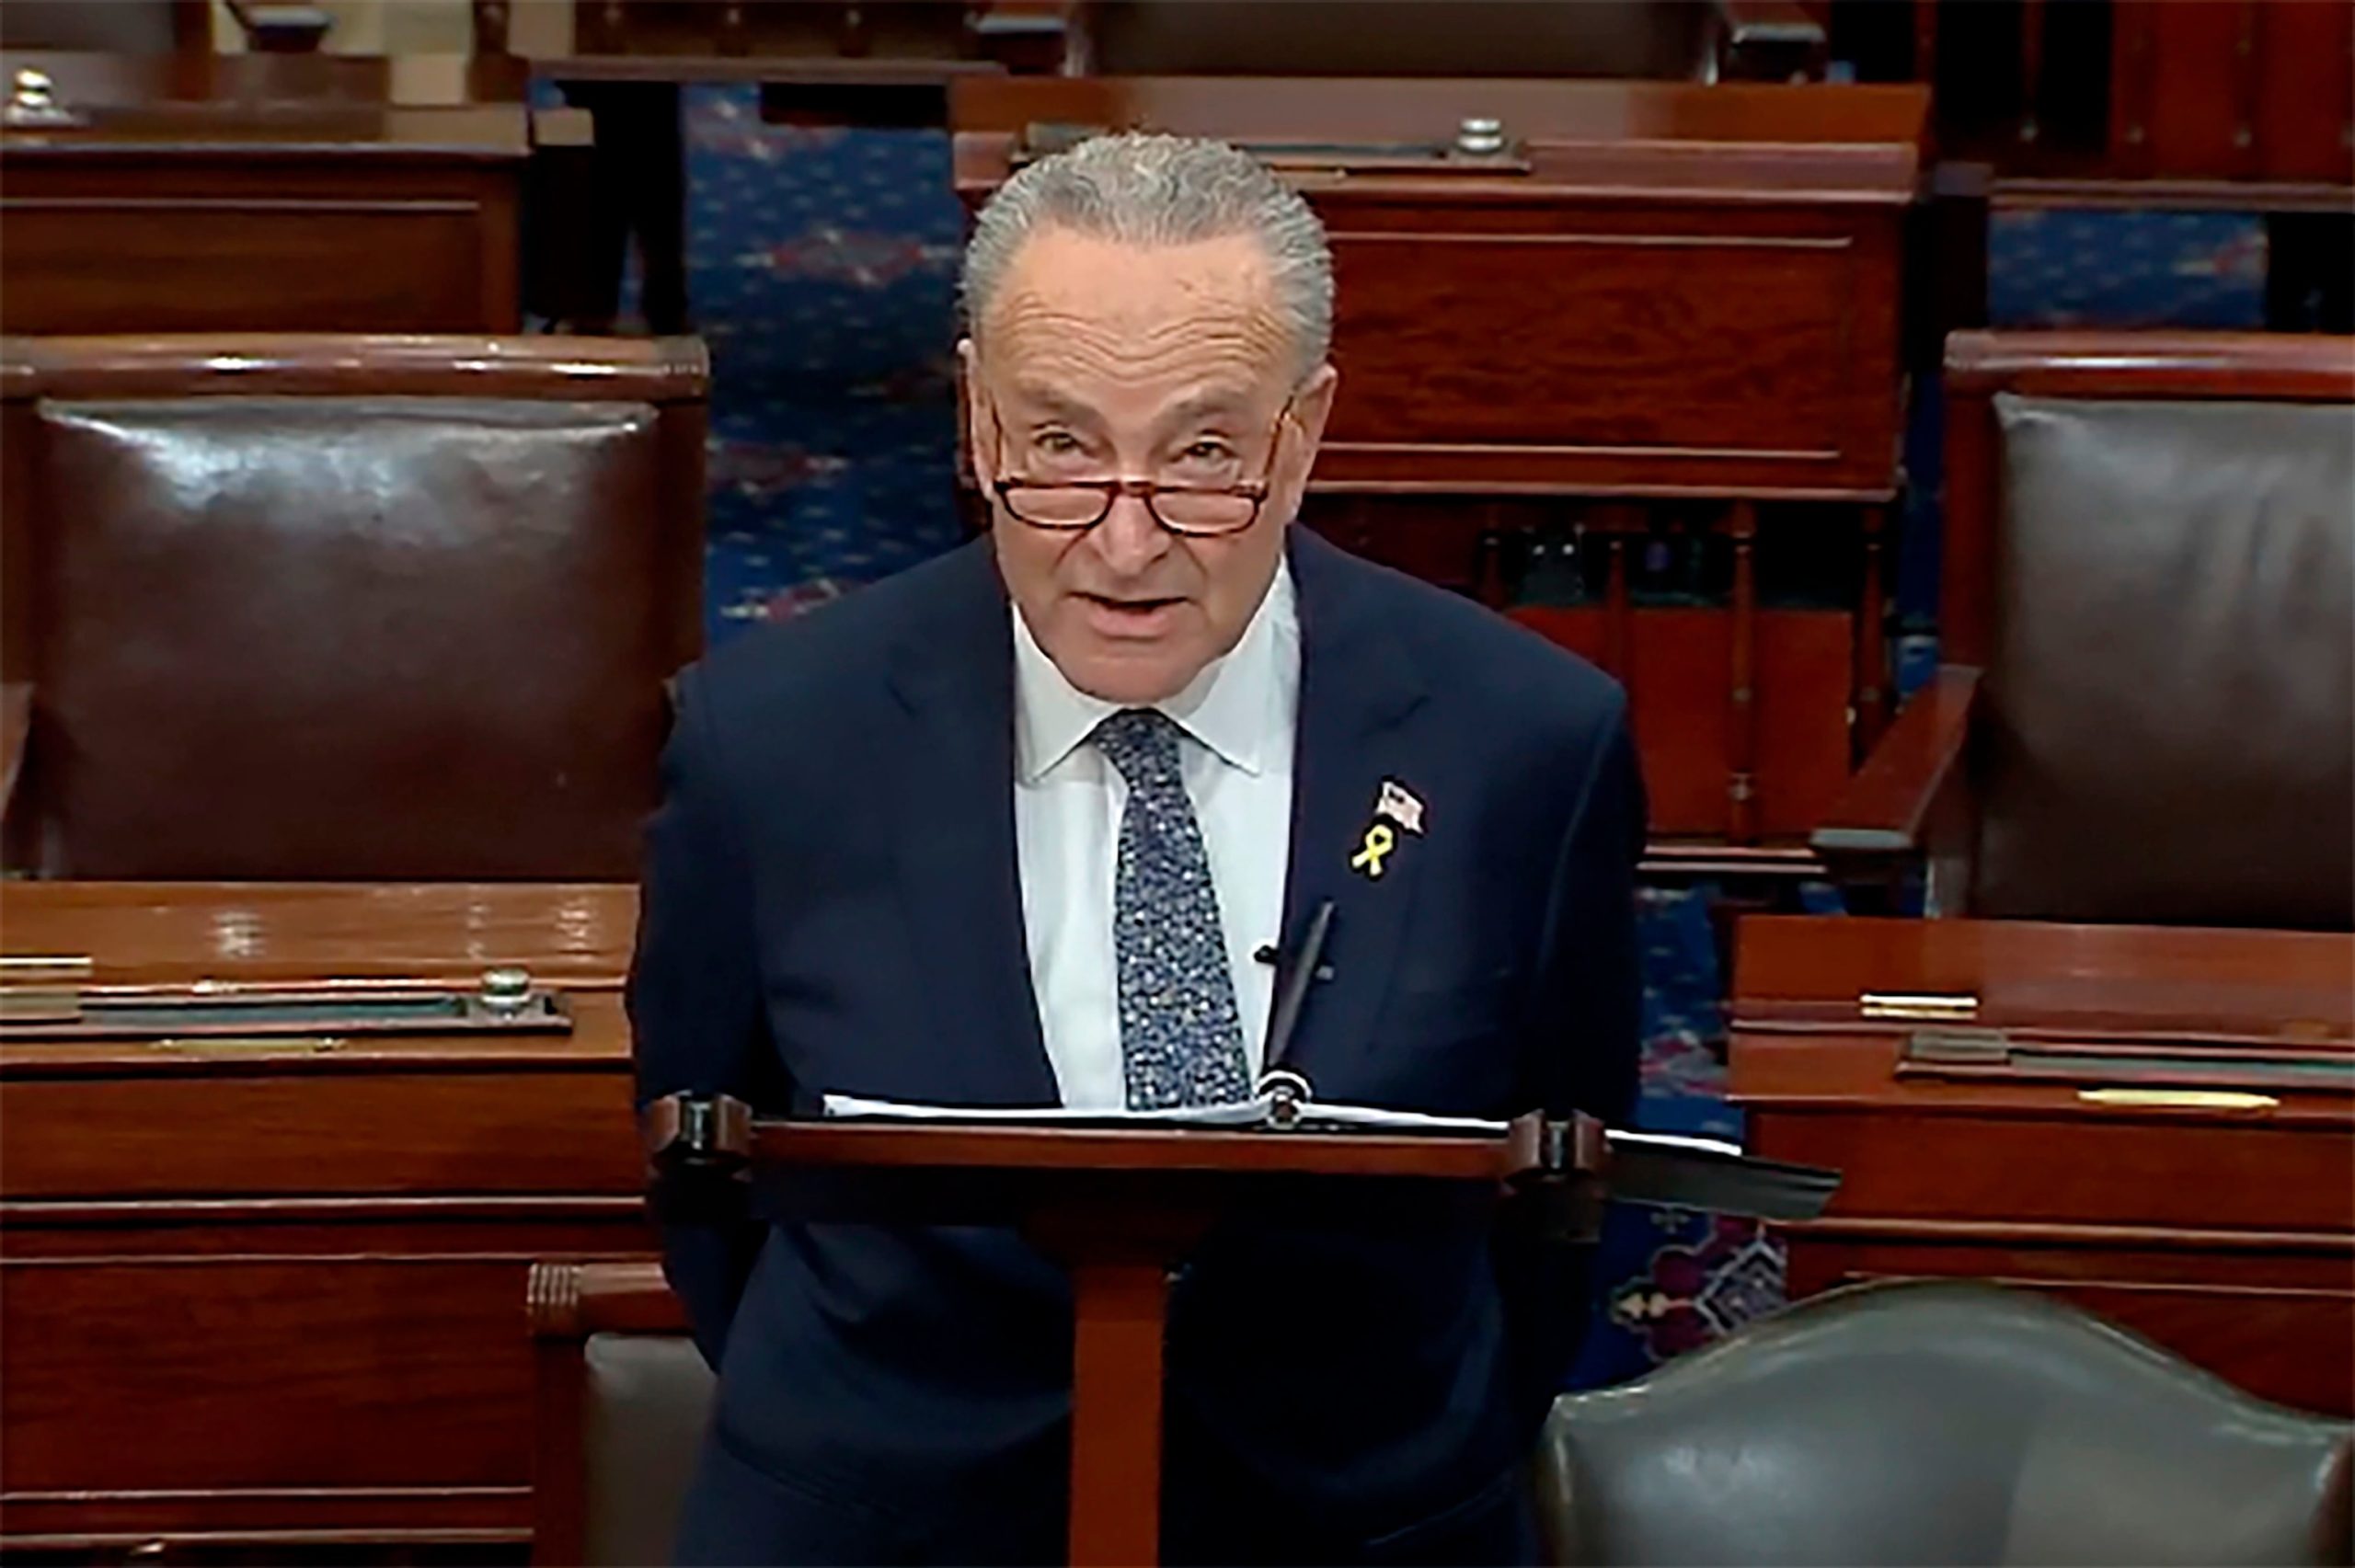 Senator Schumer advocates for new elections in Israel and cautions that Netanyahu has strayed from his path